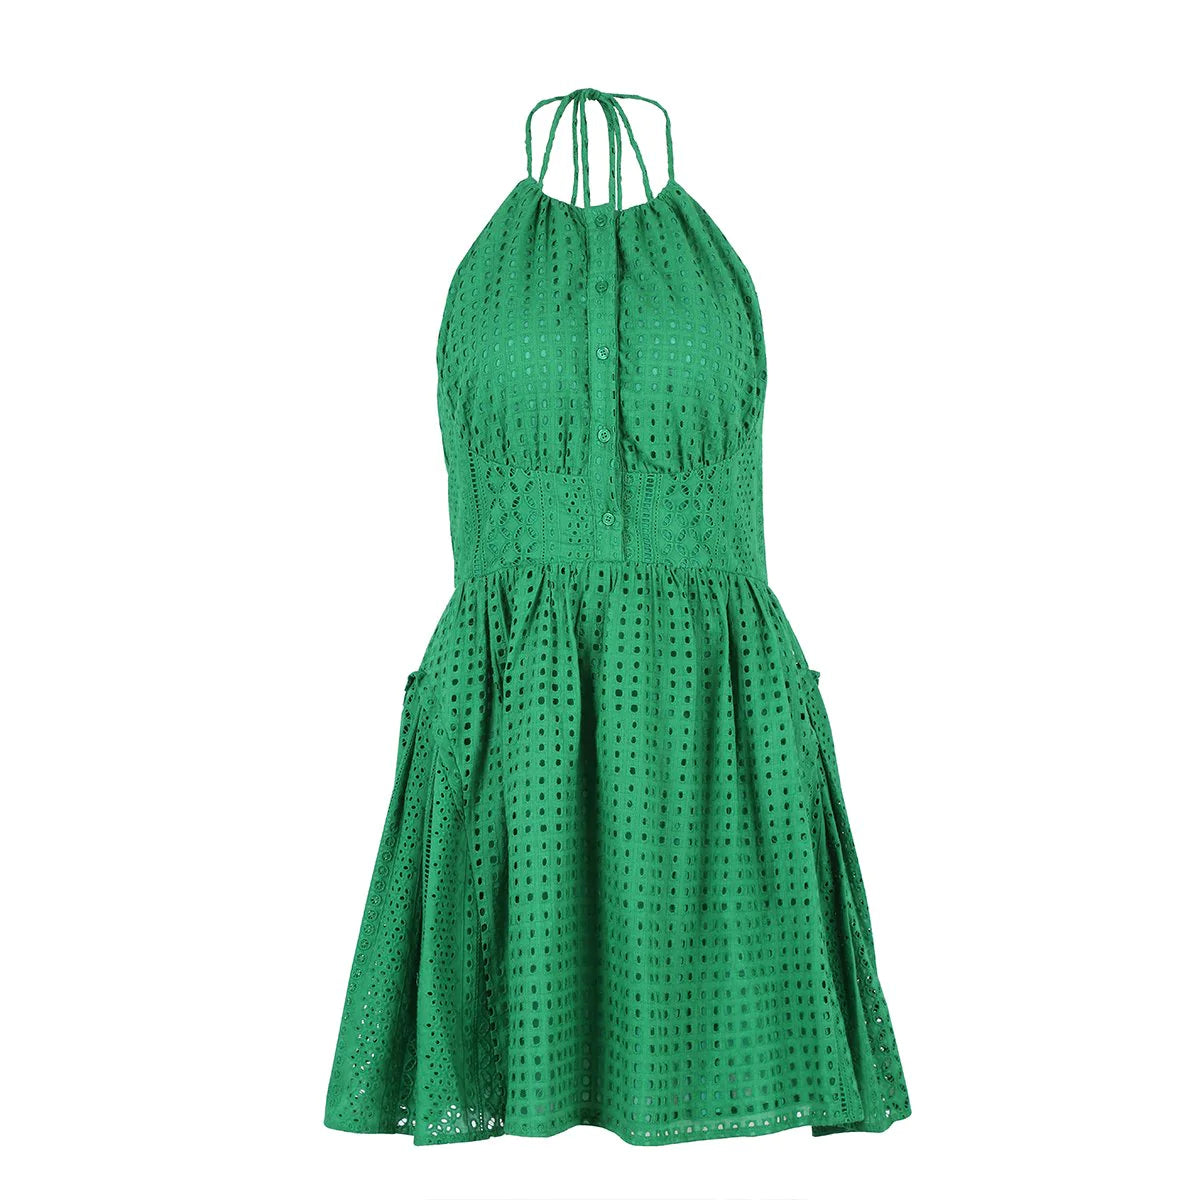 The Ashby Dress in Kelly Green Eyelet